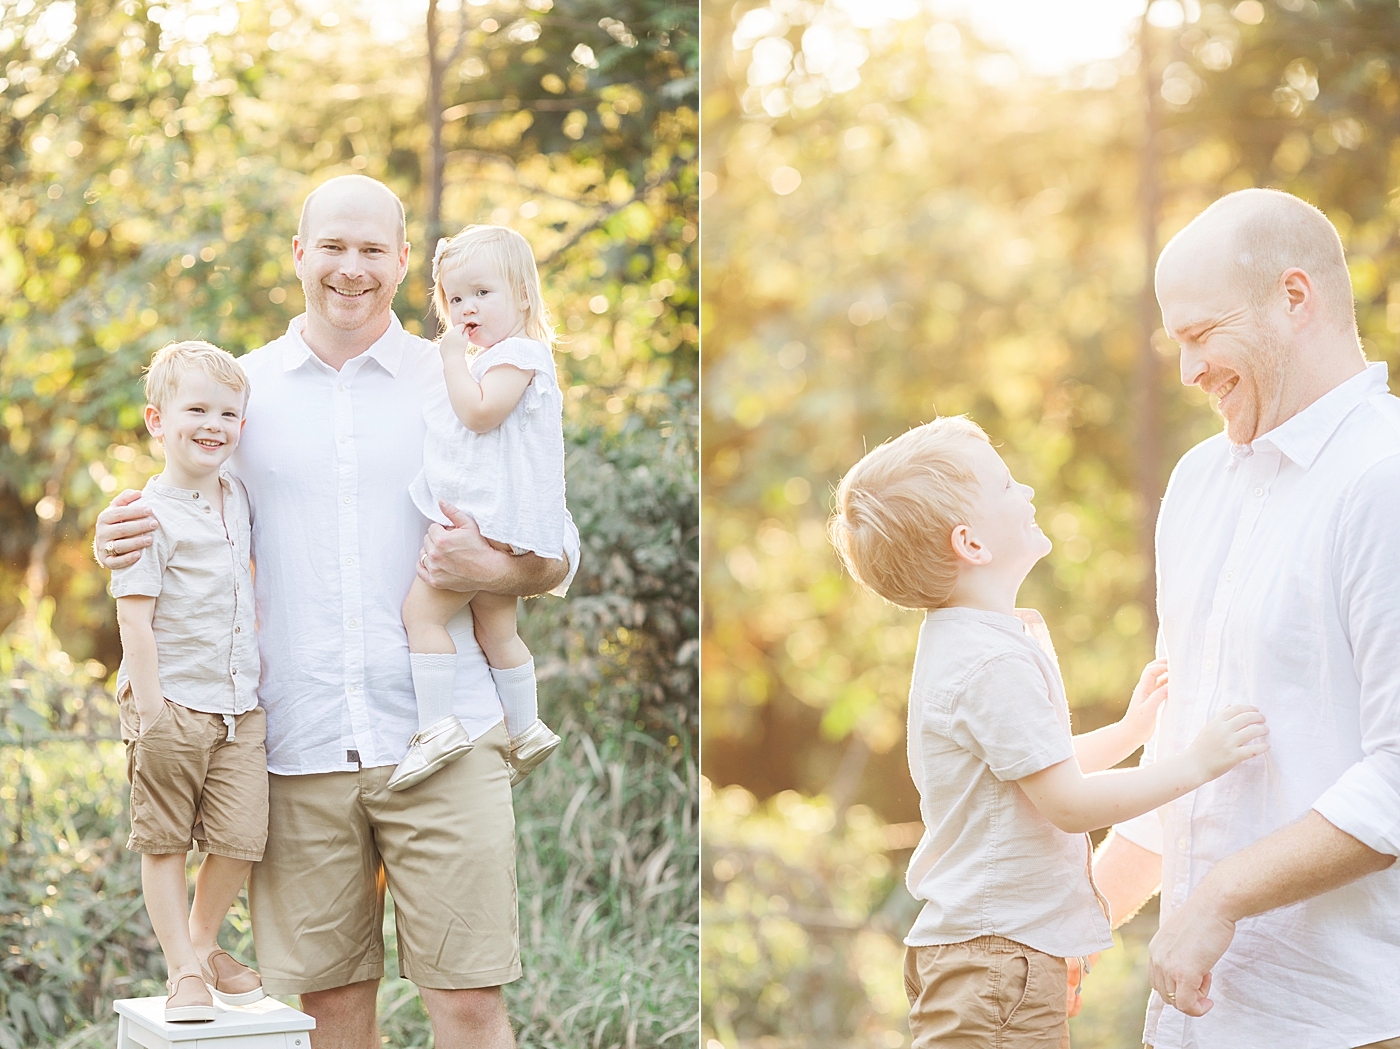 Photos of Dad with his son and daughter. Photo by Fresh Light Photography.